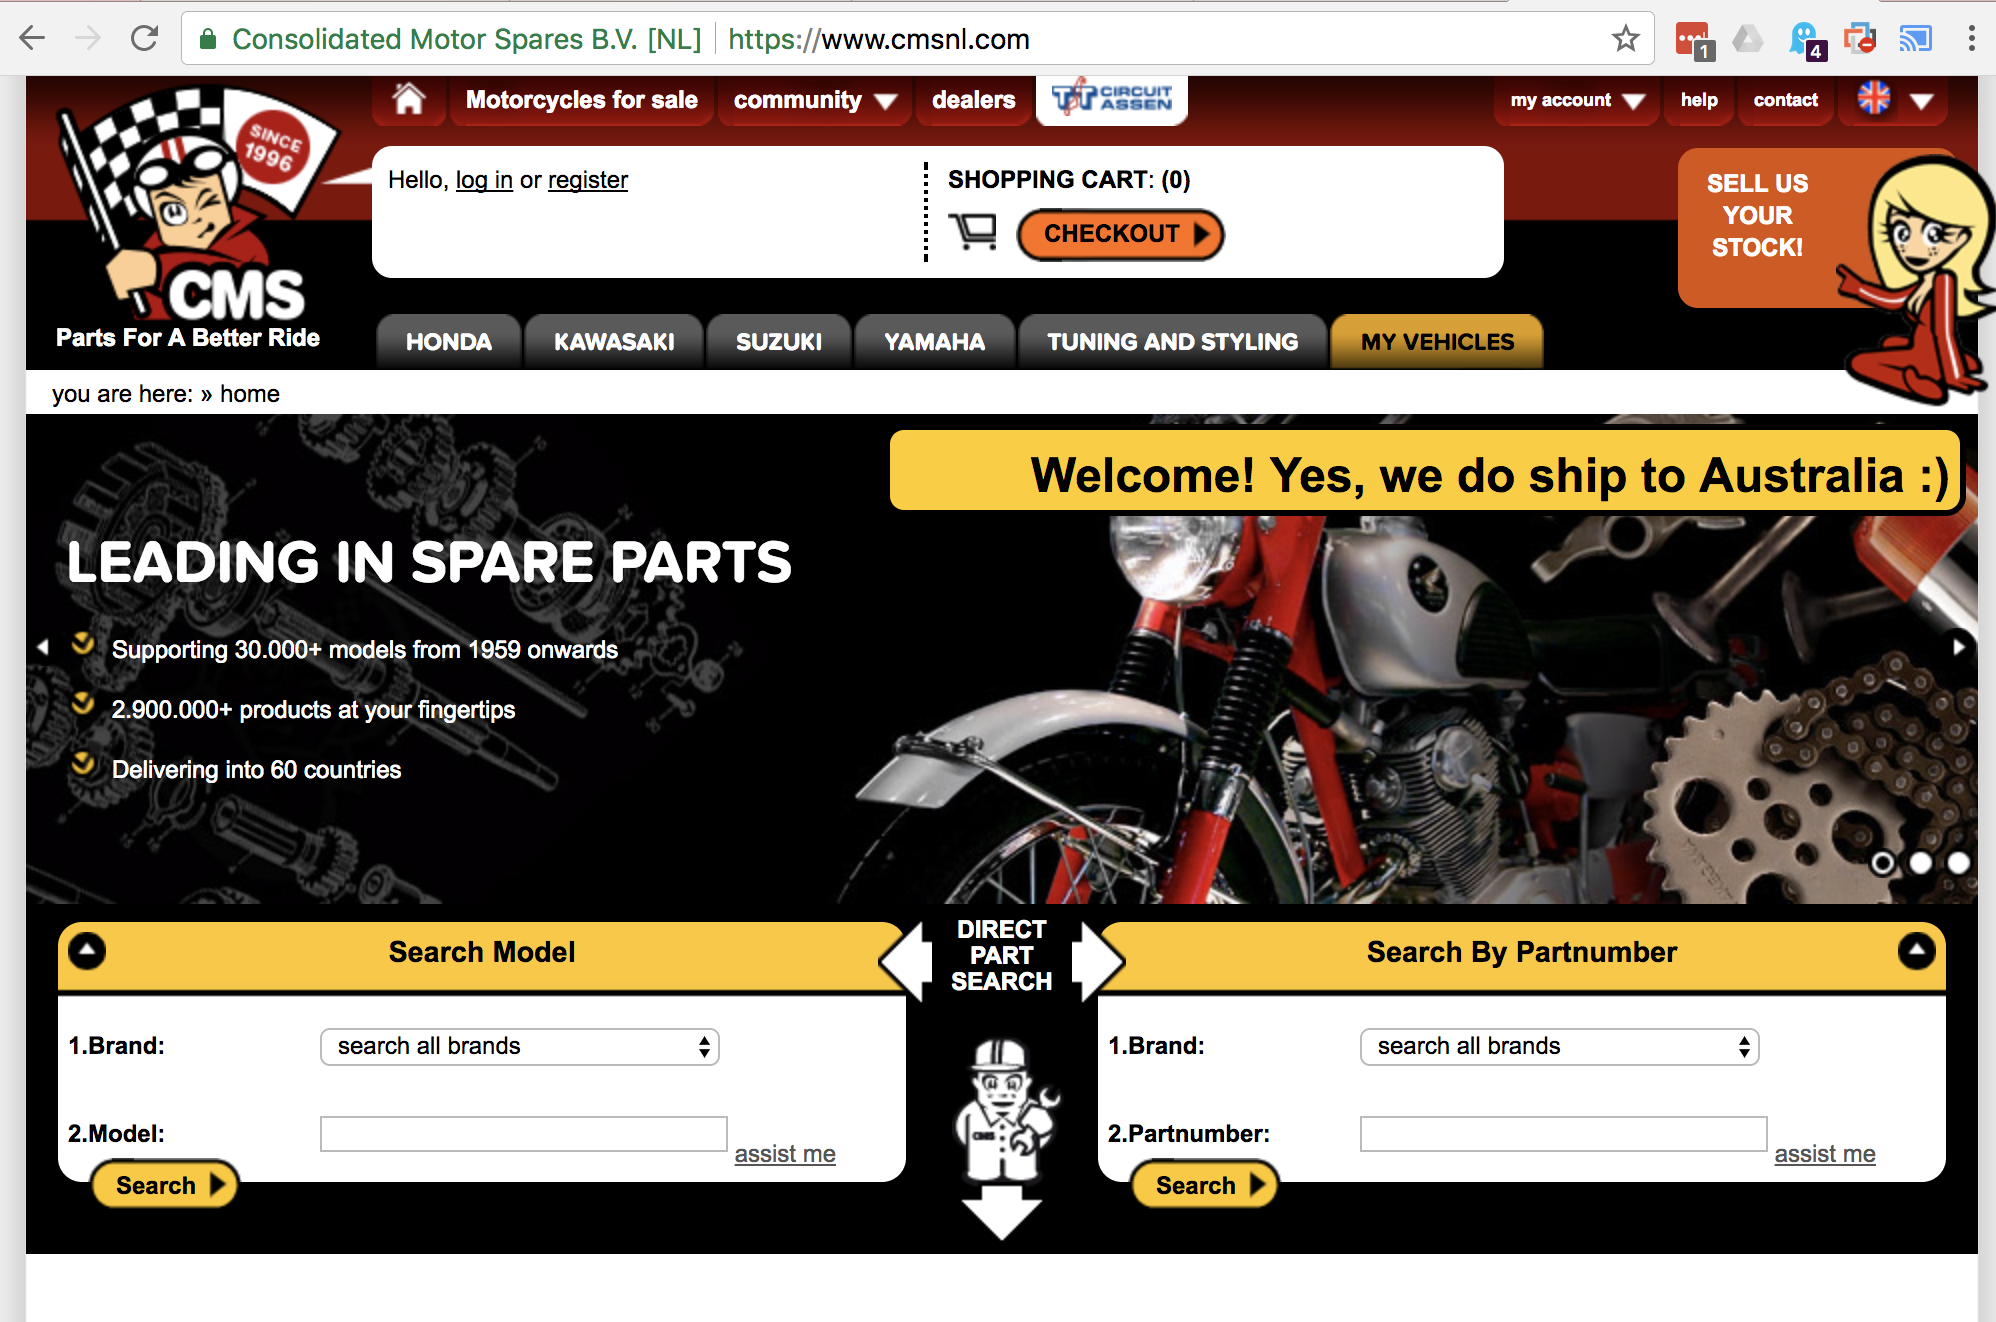 Here's how to find parts for your vintage motorcycle using the CMSNL website.